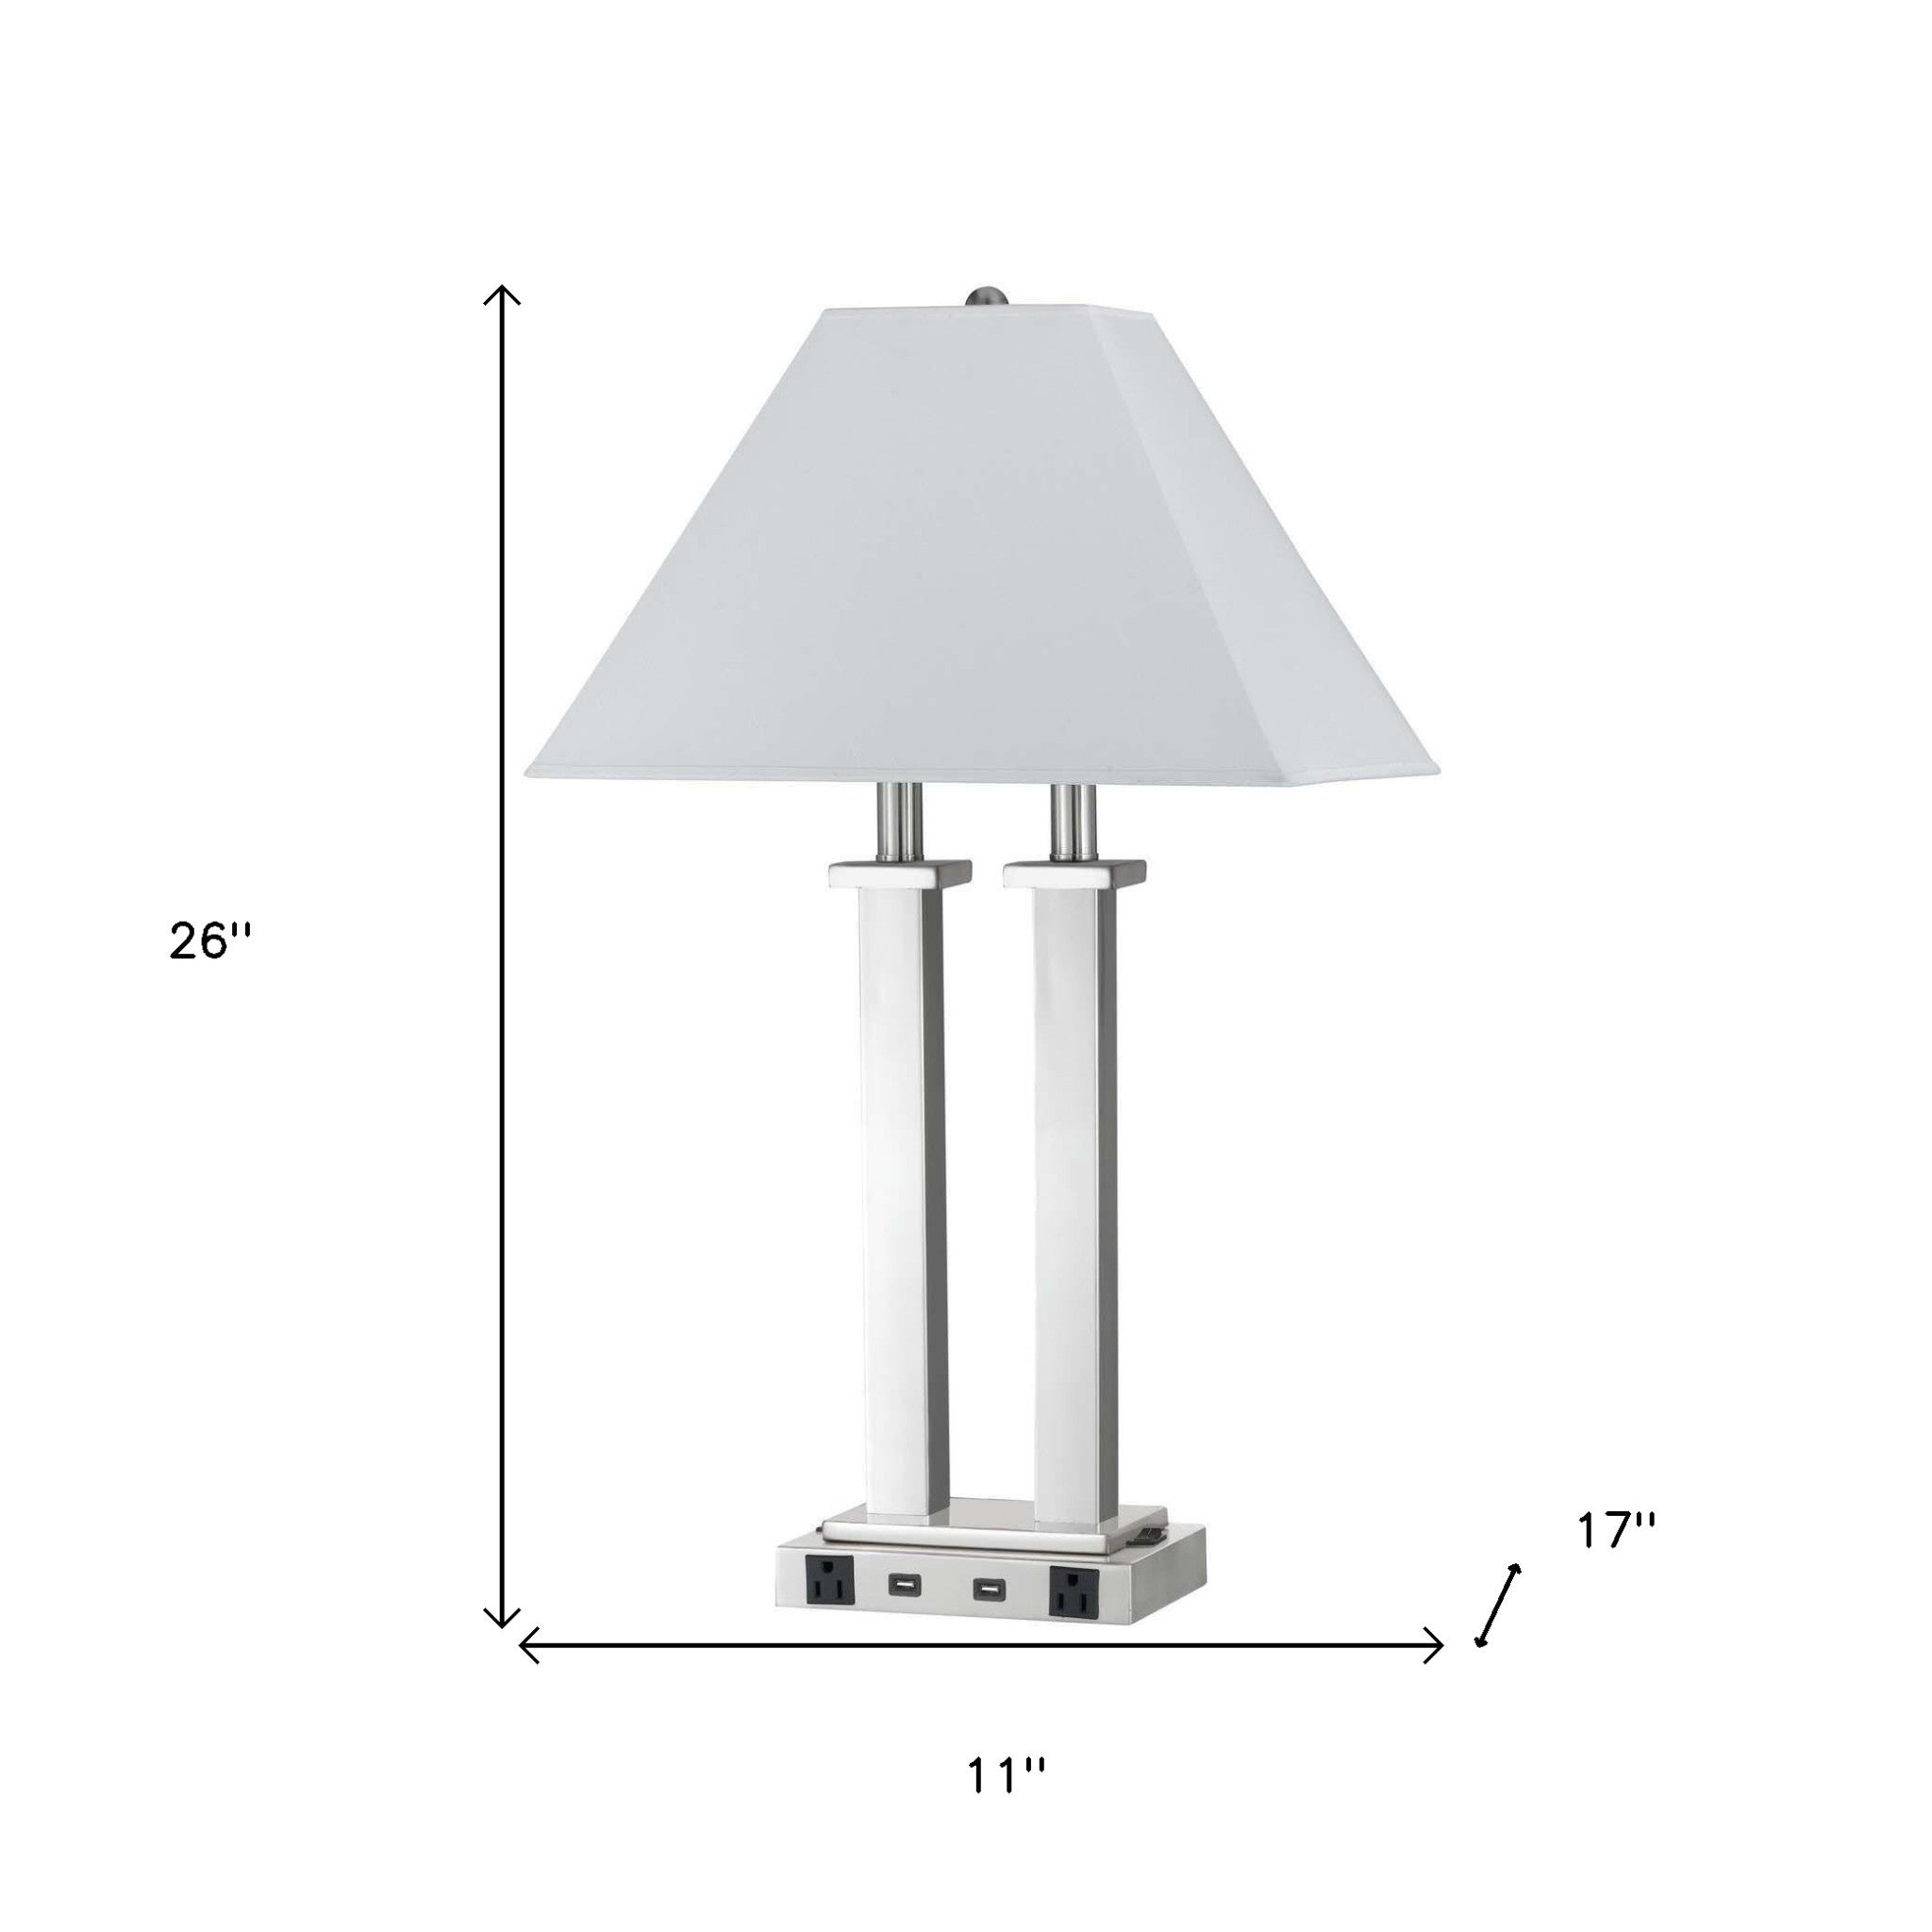 26" Nickel Metal Two Light Desk Usb Table Lamp With White Novelty Shade